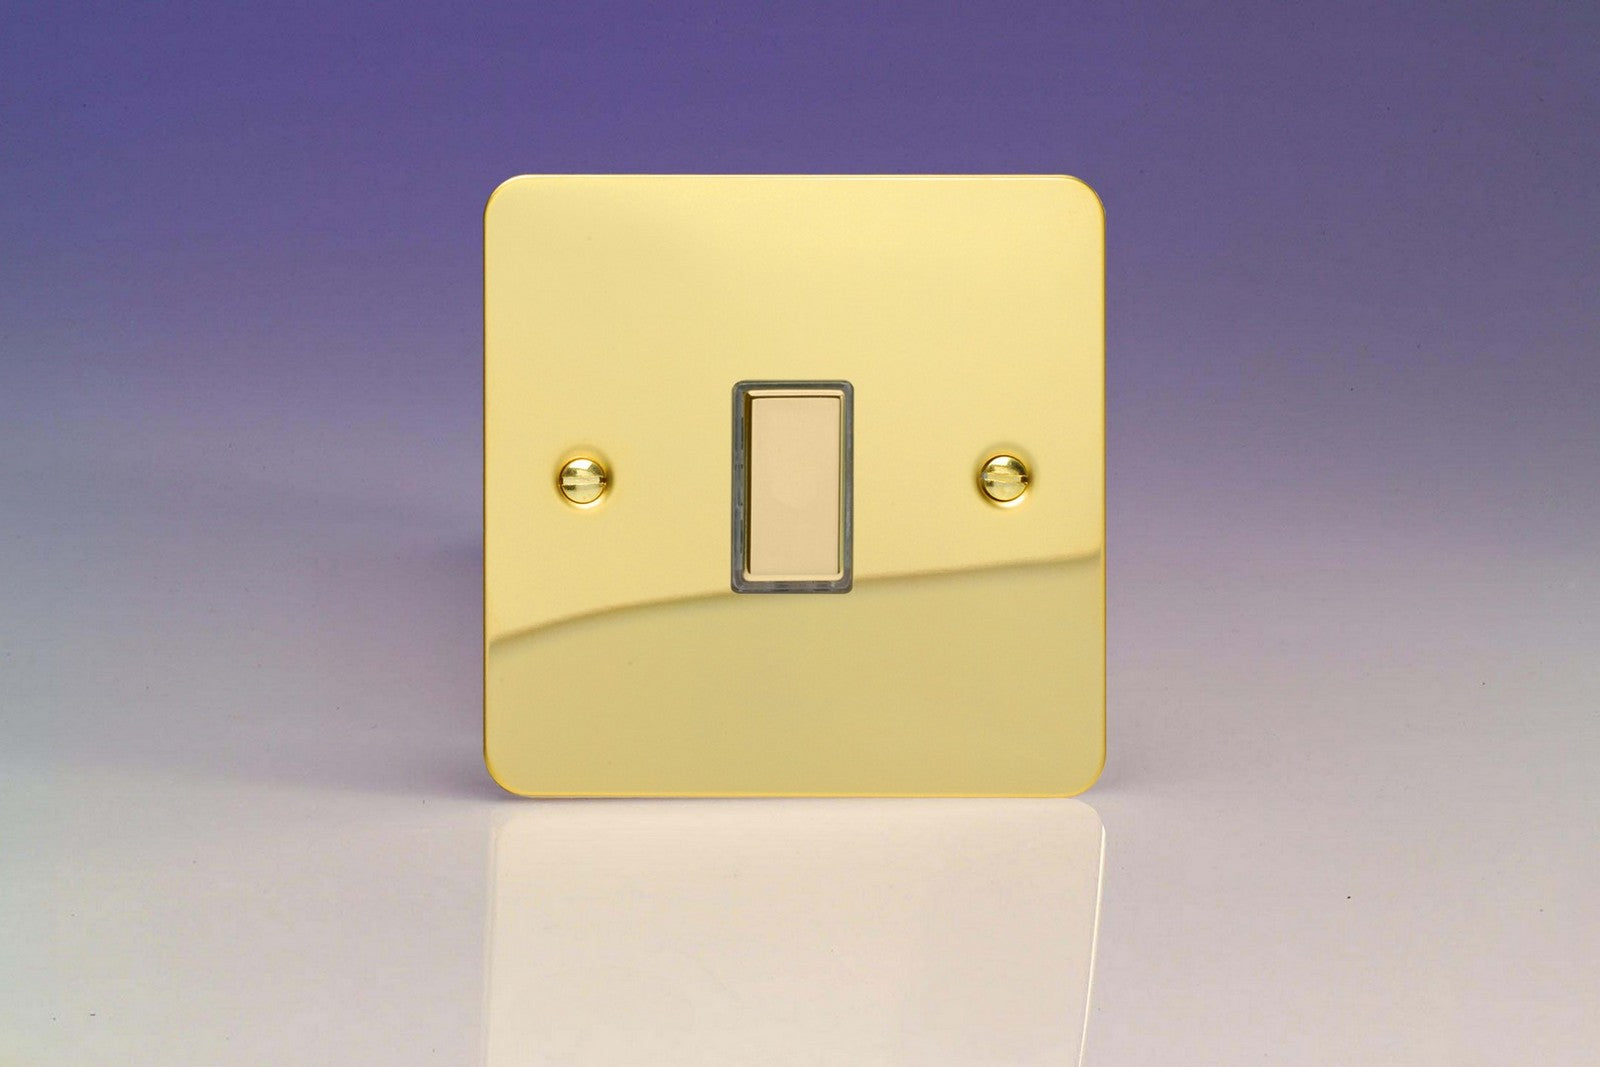 Varilight JFVES001 Ultraflat Polished Brass 1-Gang Tactile Touch Control Dimming Slave for use with Multi-Point Touch or Remote Master on 2-Way Circuits